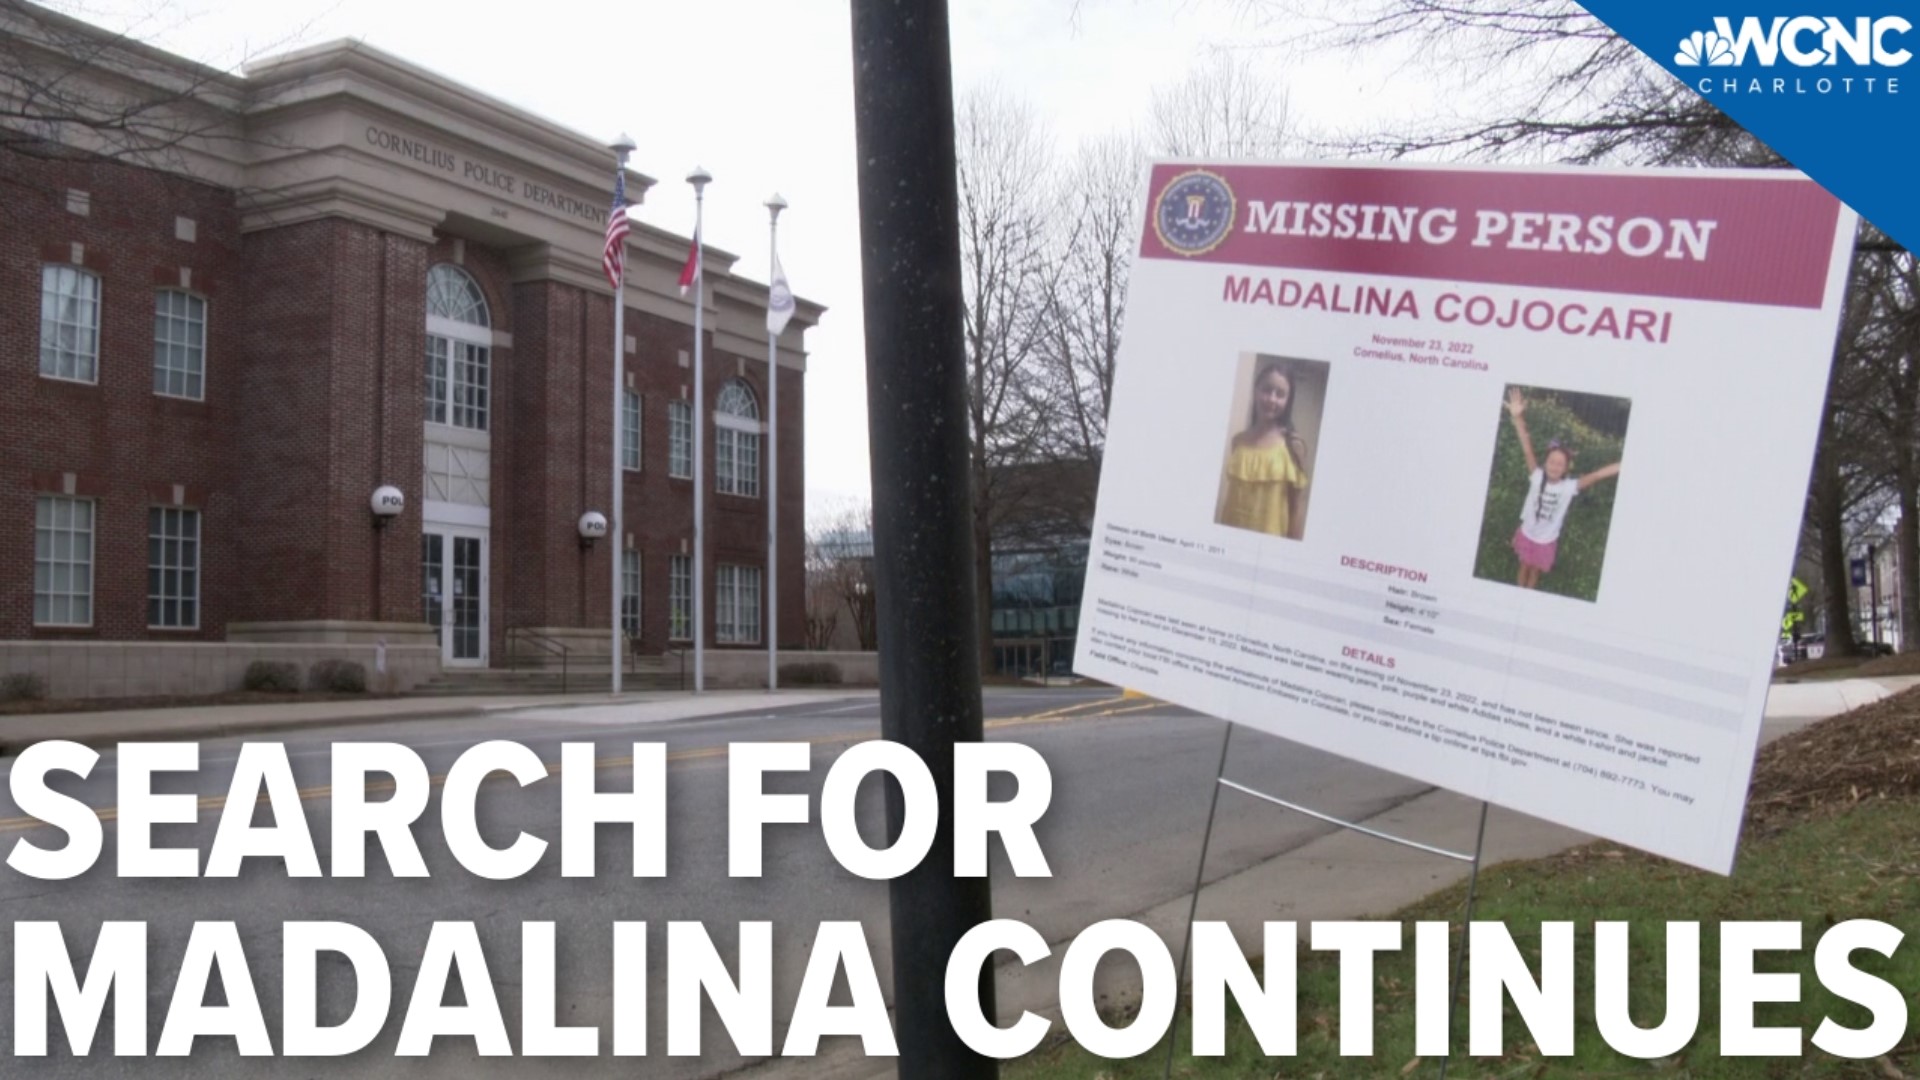 Missing Cornelius girl Madalina Cojocari has now not been seen publicly for more than 100 days.